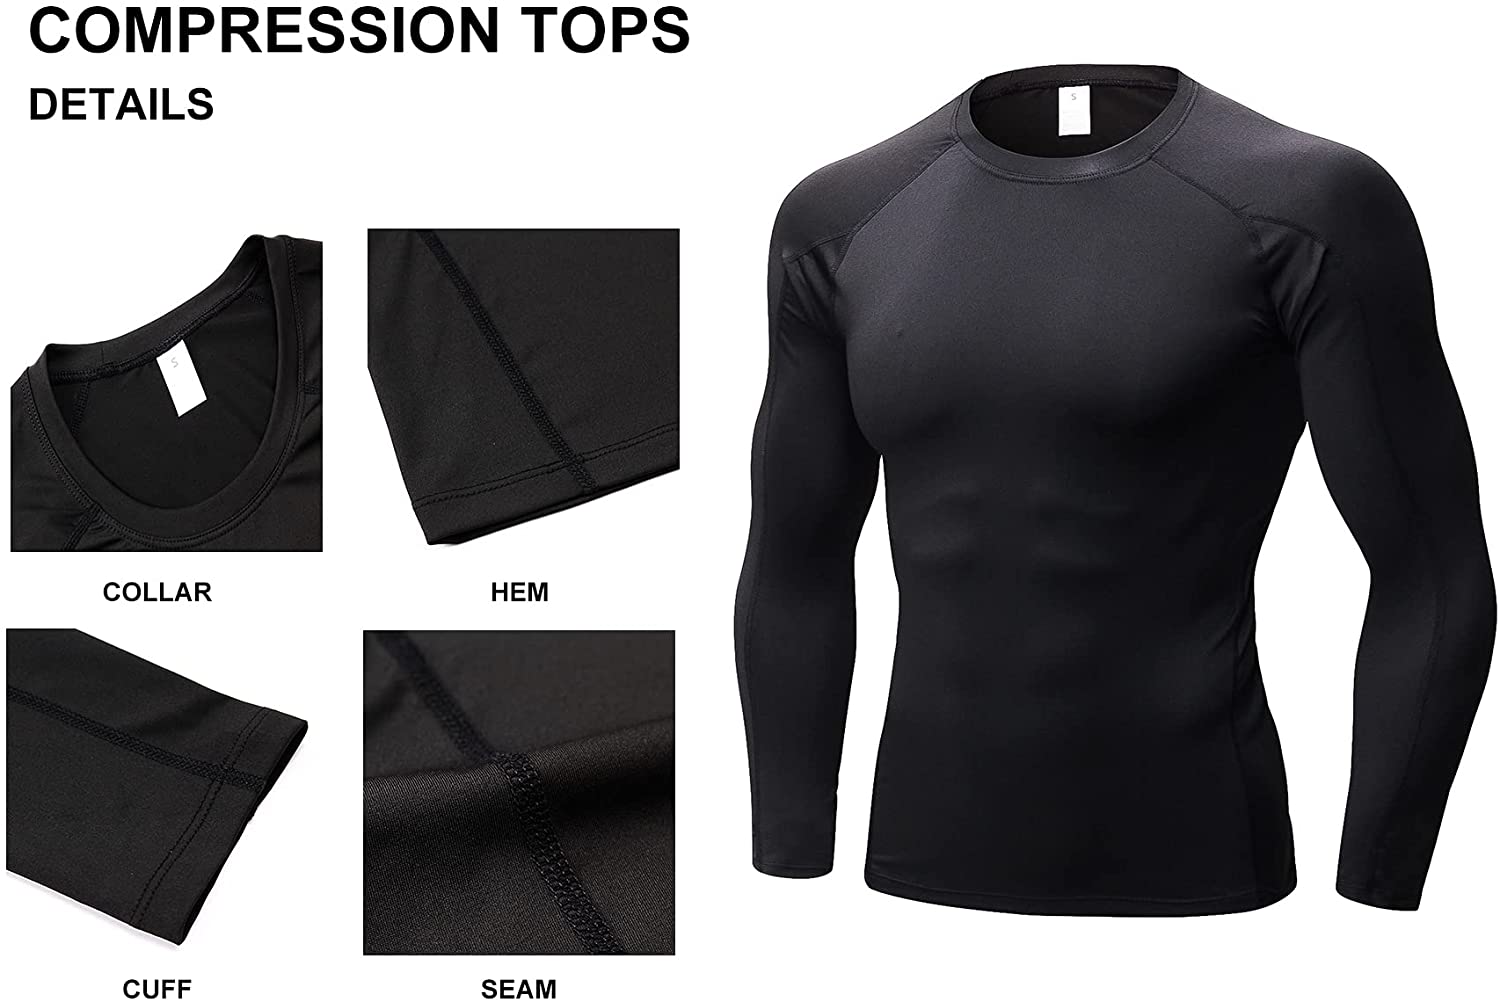 Men Thermal Flecce Long Sleeve Compression Shirts Athletic Base Layer Top  Winter Male Gear Running T-Shirt Size 3X-Large – LANBAOSI